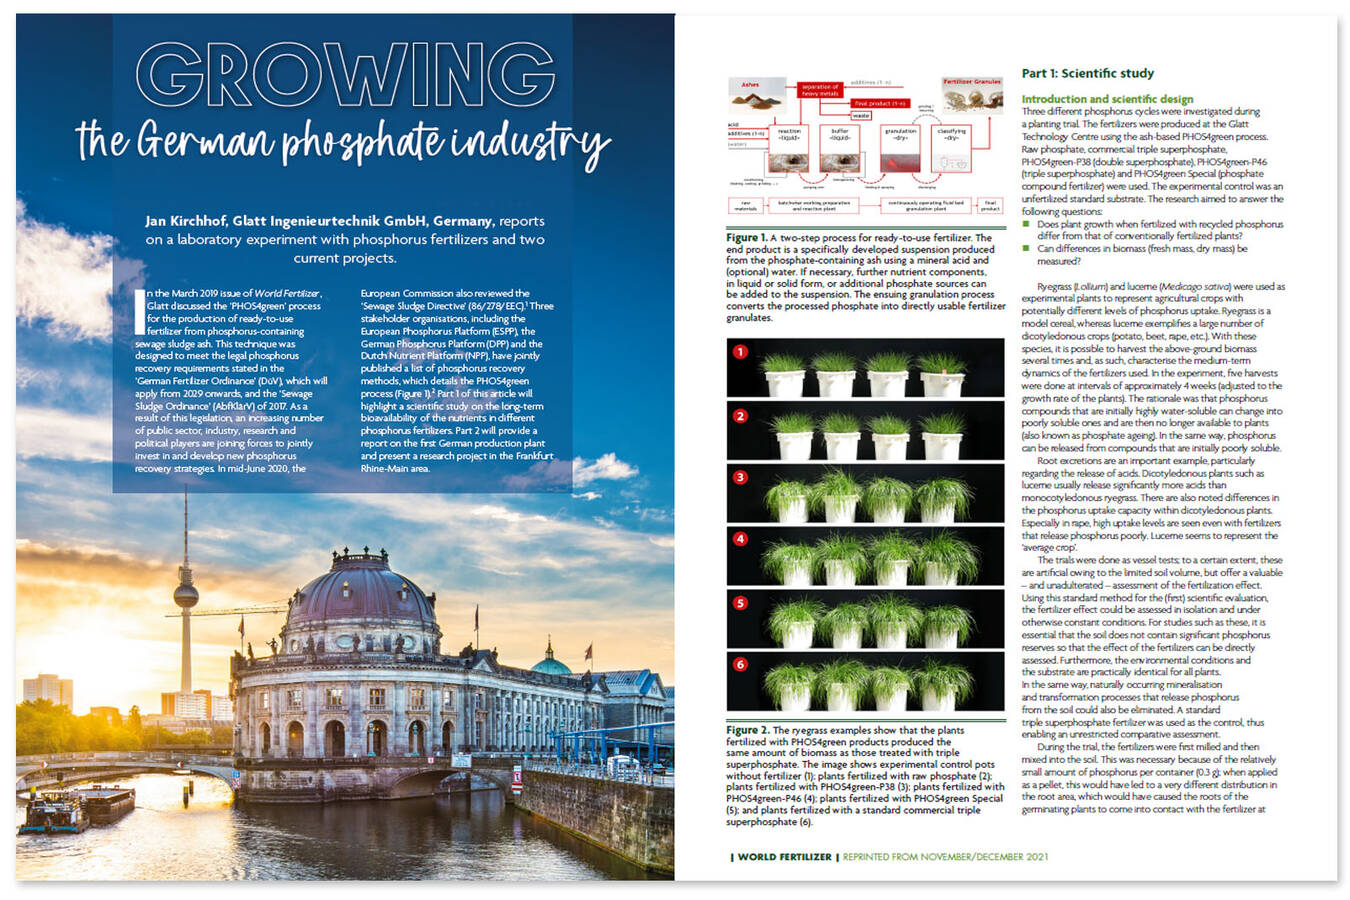 Growing the German phosphate industry Jan Kirchhof, Glatt Ingenieurtechnik GmbH, Germany, reports on a laboratory experiment with phosphorus fertilizers and two current projects.